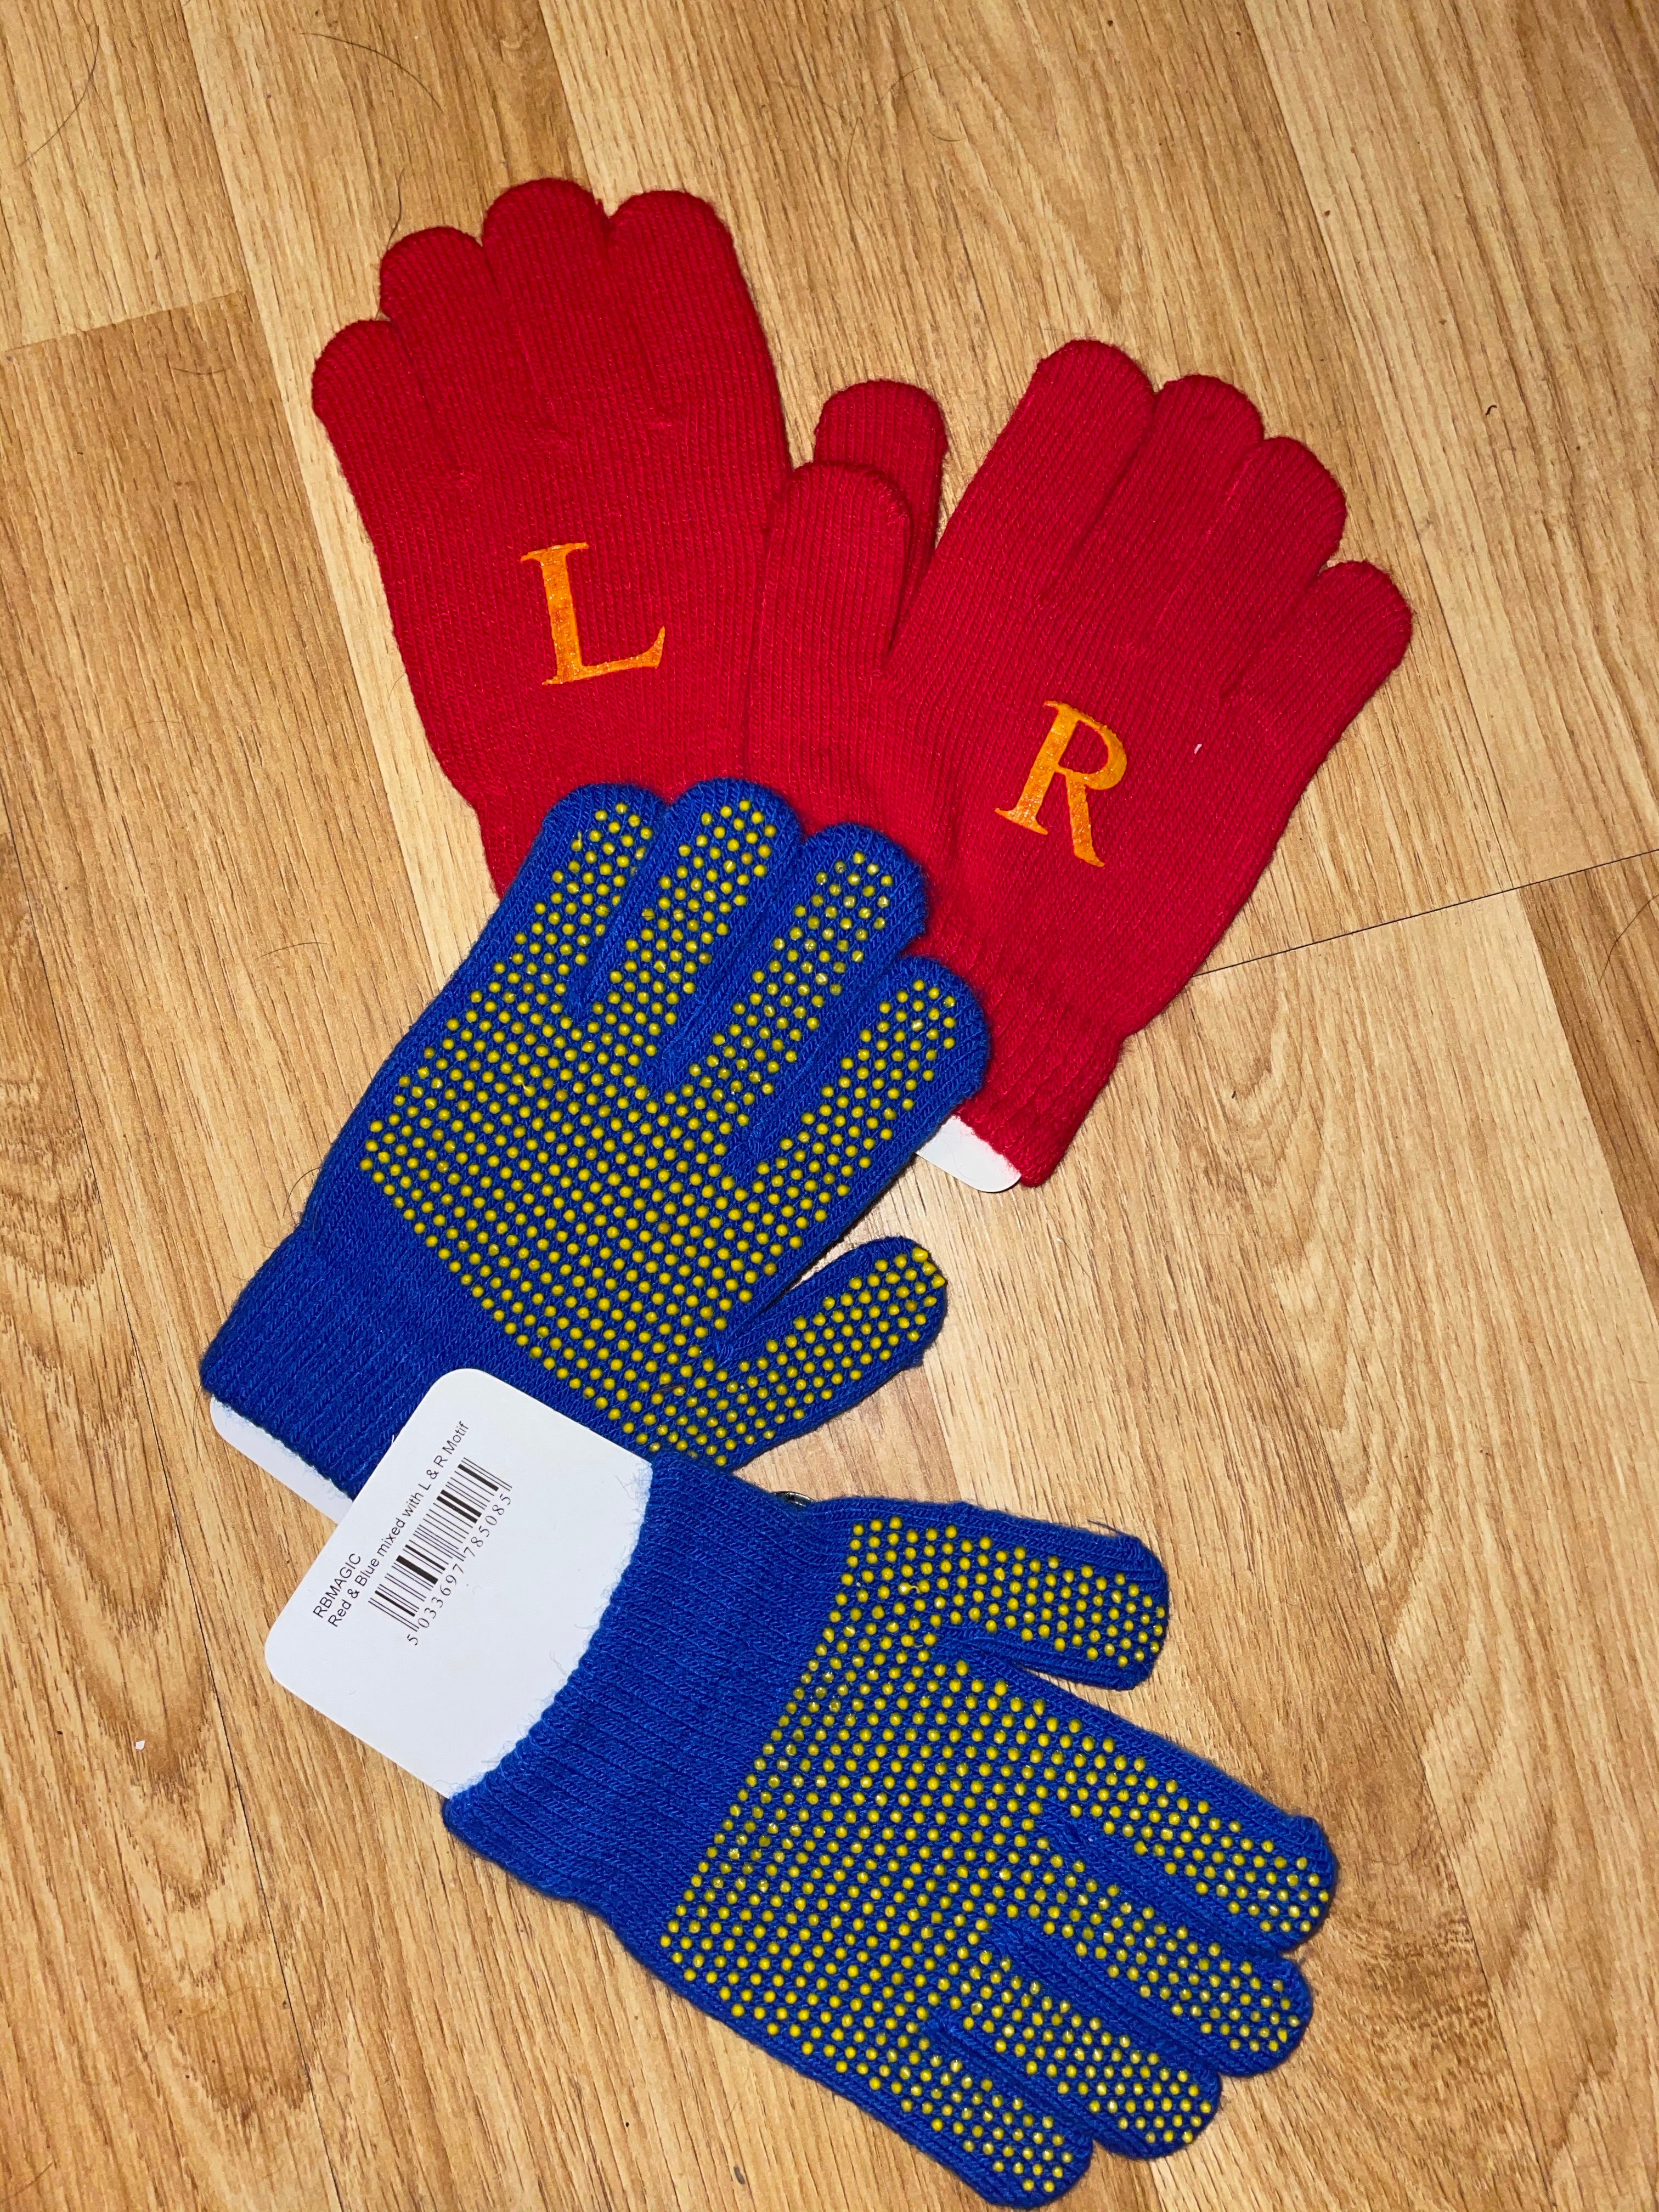 Leftie Rightie Magic Gloves - Red or Blue - Free Delivery 🚚